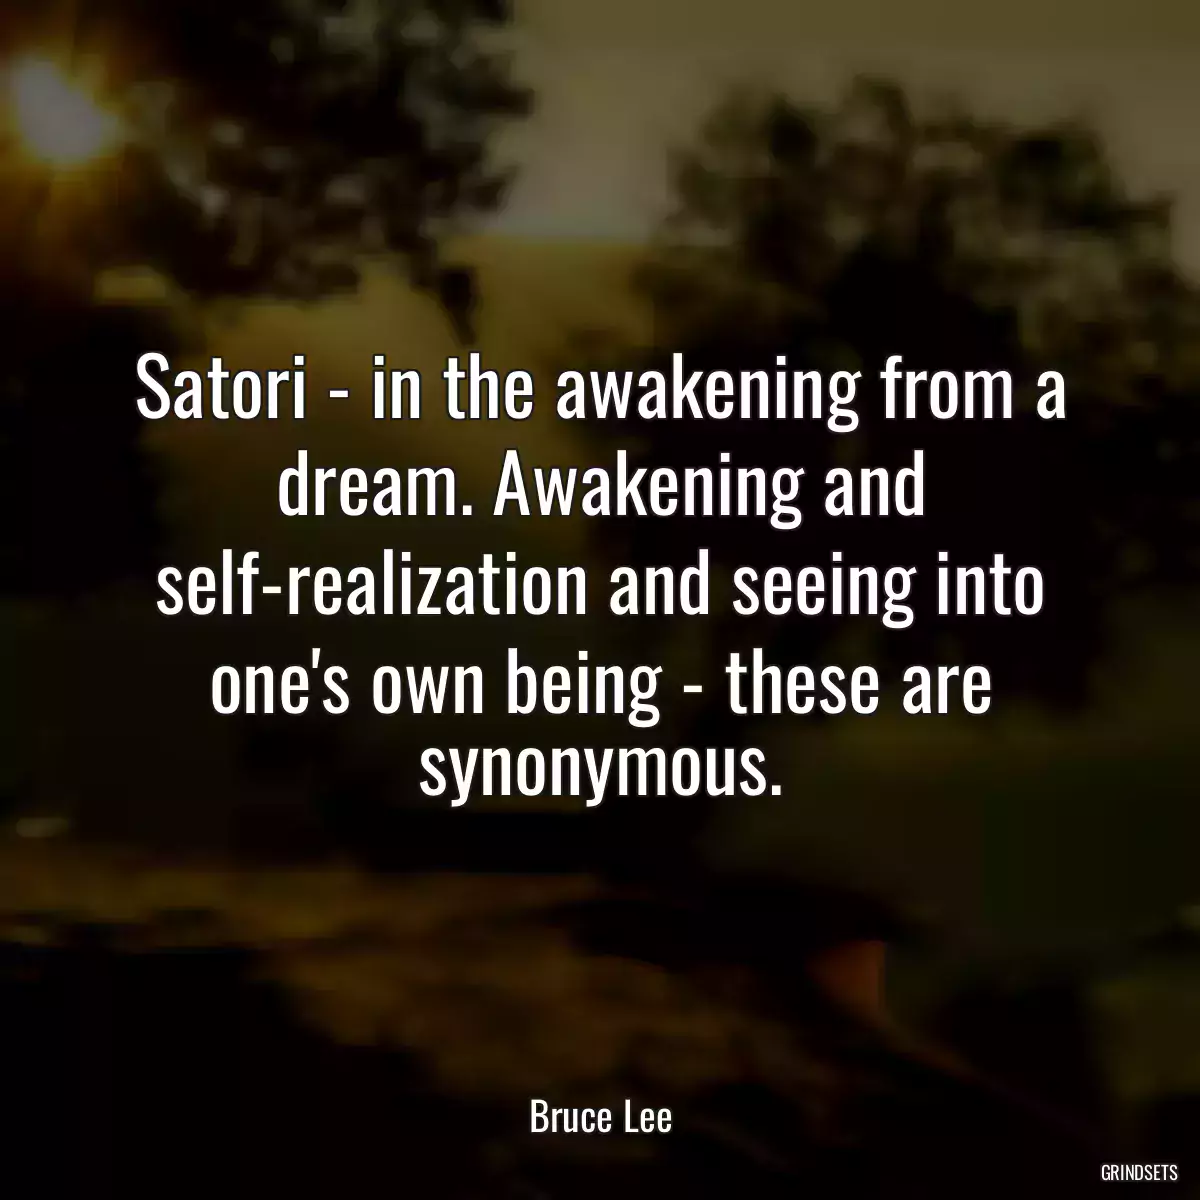 Satori - in the awakening from a dream. Awakening and self-realization and seeing into one\'s own being - these are synonymous.